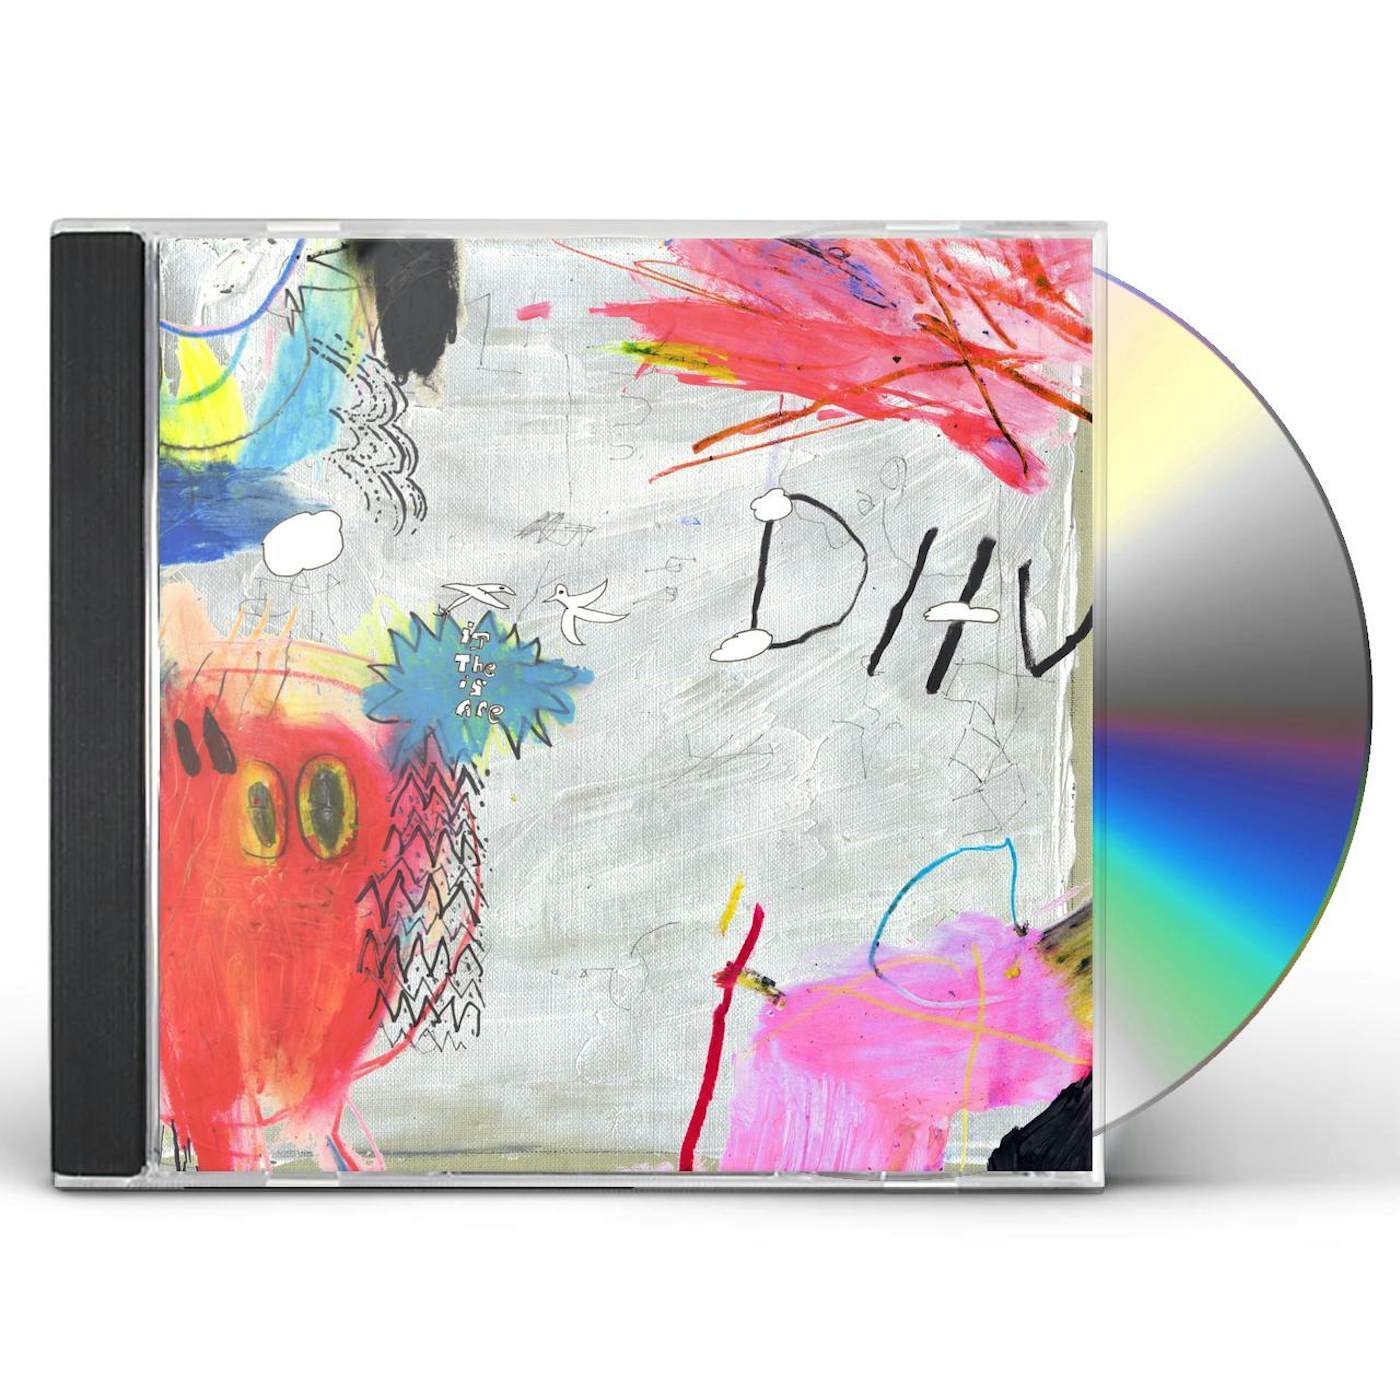 DIIV IS THE IS ARE CD